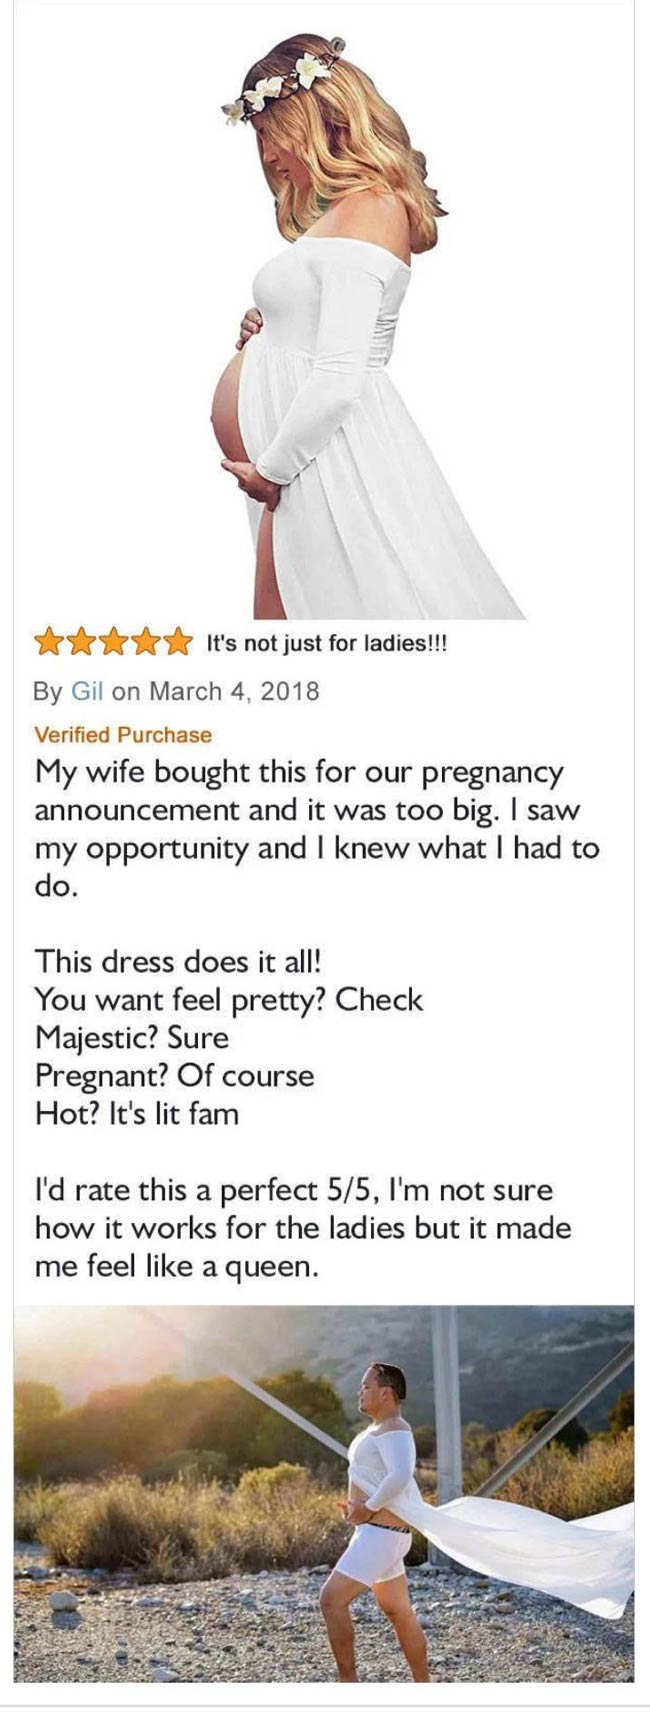 This man's Amazon review is glorious!